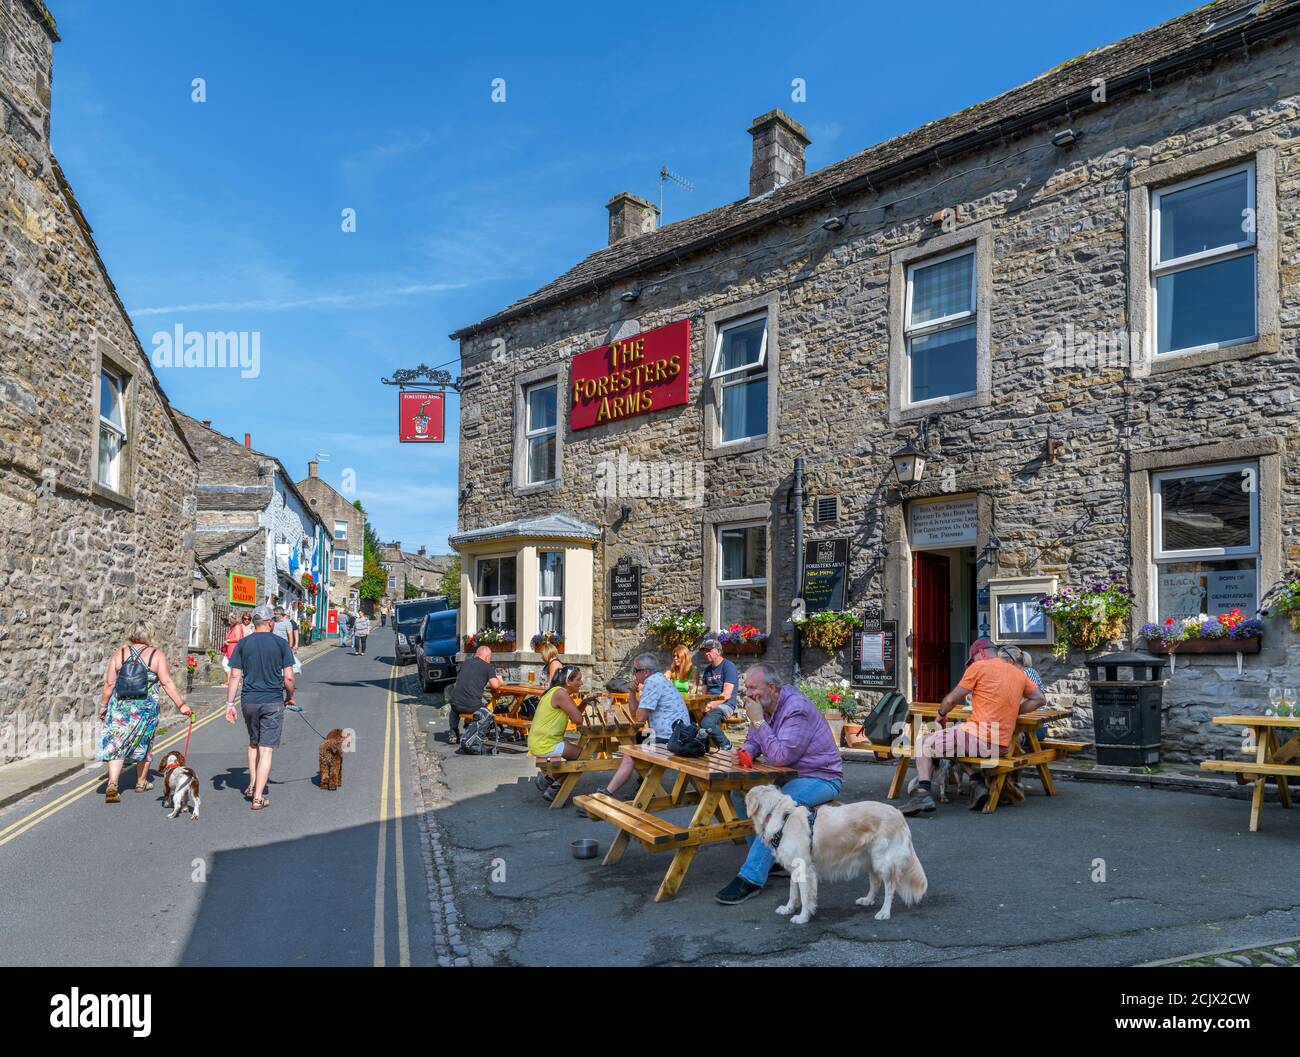 The Foresters Arms on the Main Street in the traditional English village of Grassington, Yorkshire Dales National Park, North Yorkshire, England, UK. Stock Photo